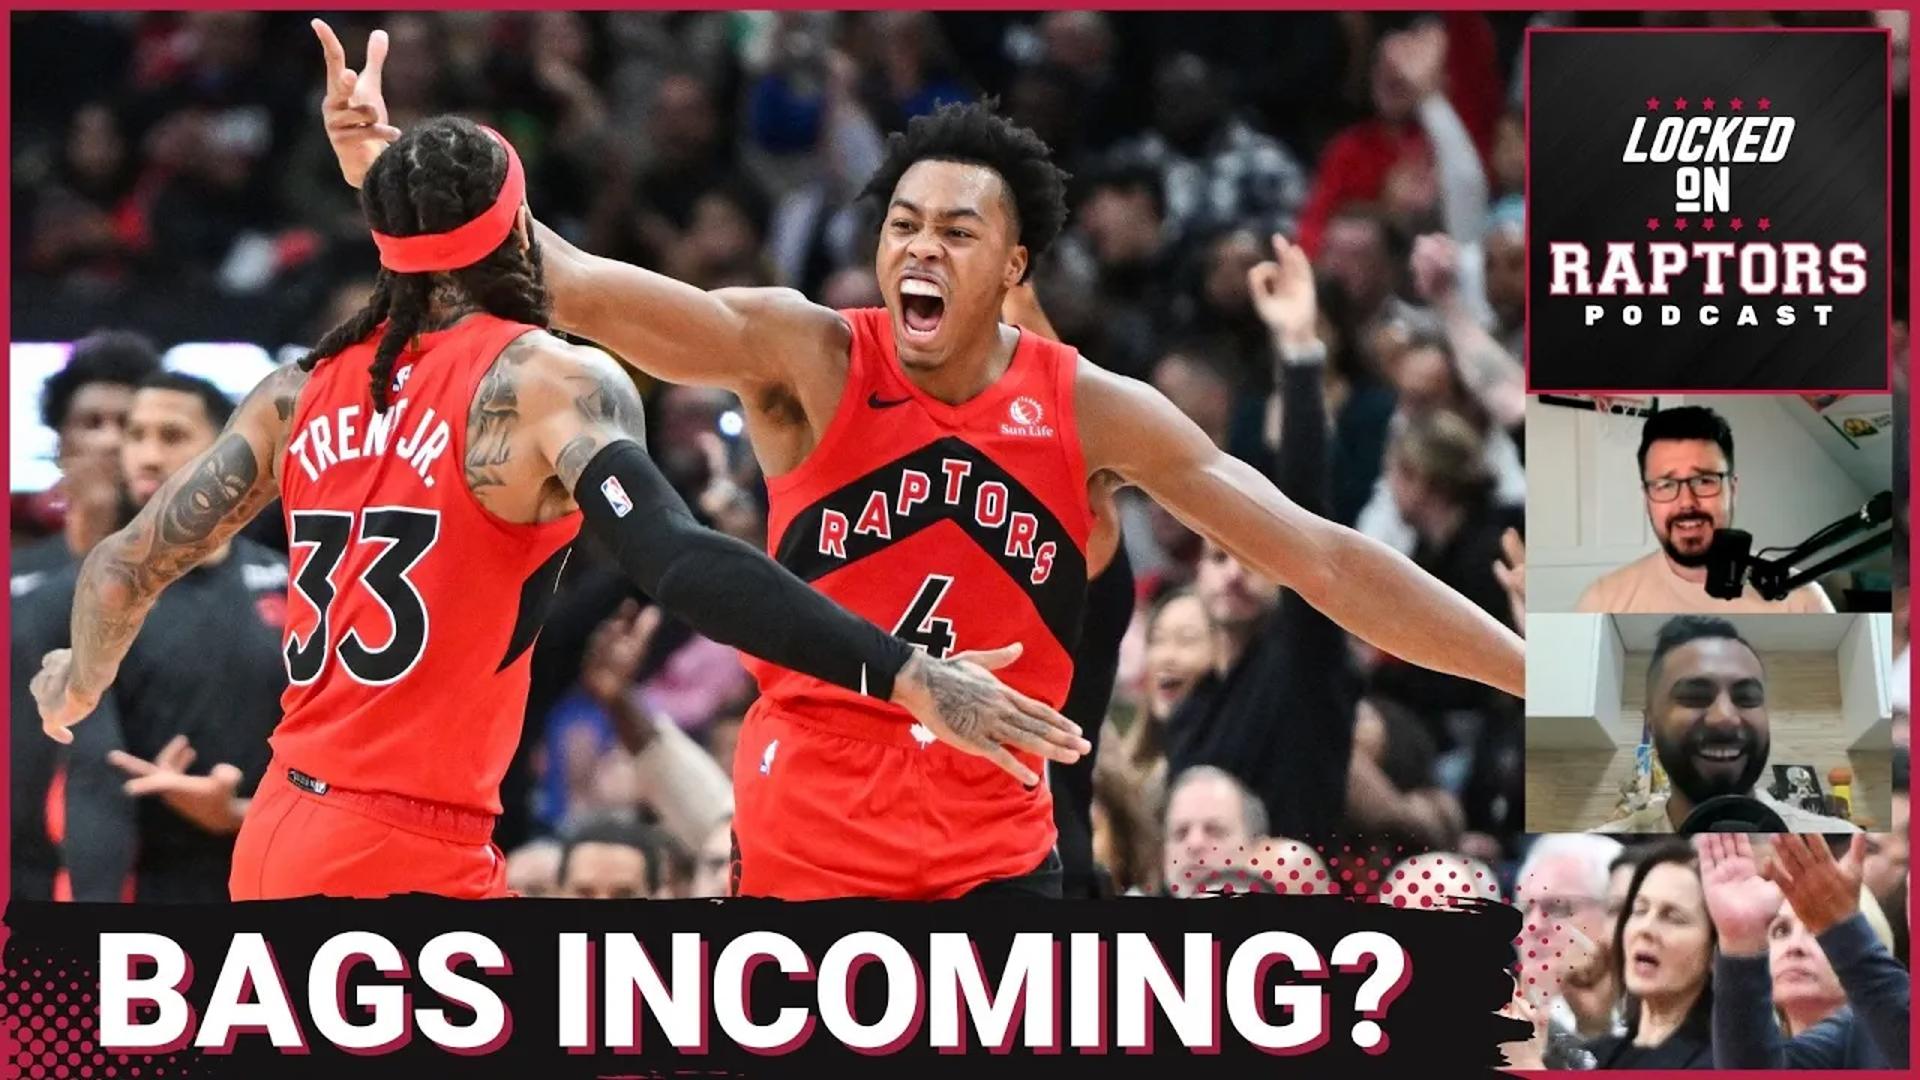 In Episode 1660, Sean Woodley is reunited at long last with Vivek Jacob (Sportsnet, Raptors in 7) to chat about the NBA season coming to an end